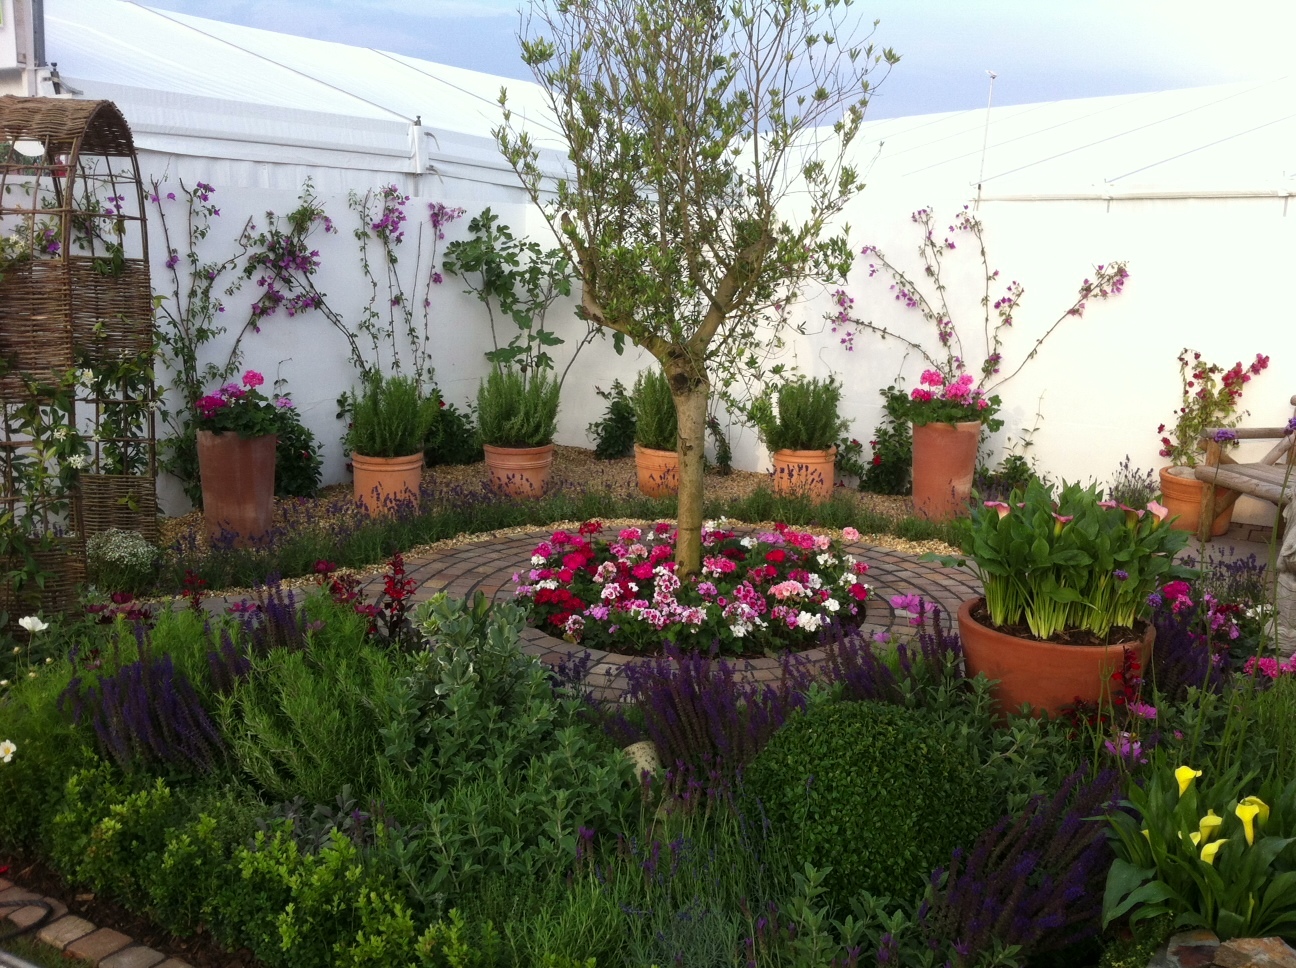 Our Gold Medal winning garden at Southport Flower Show